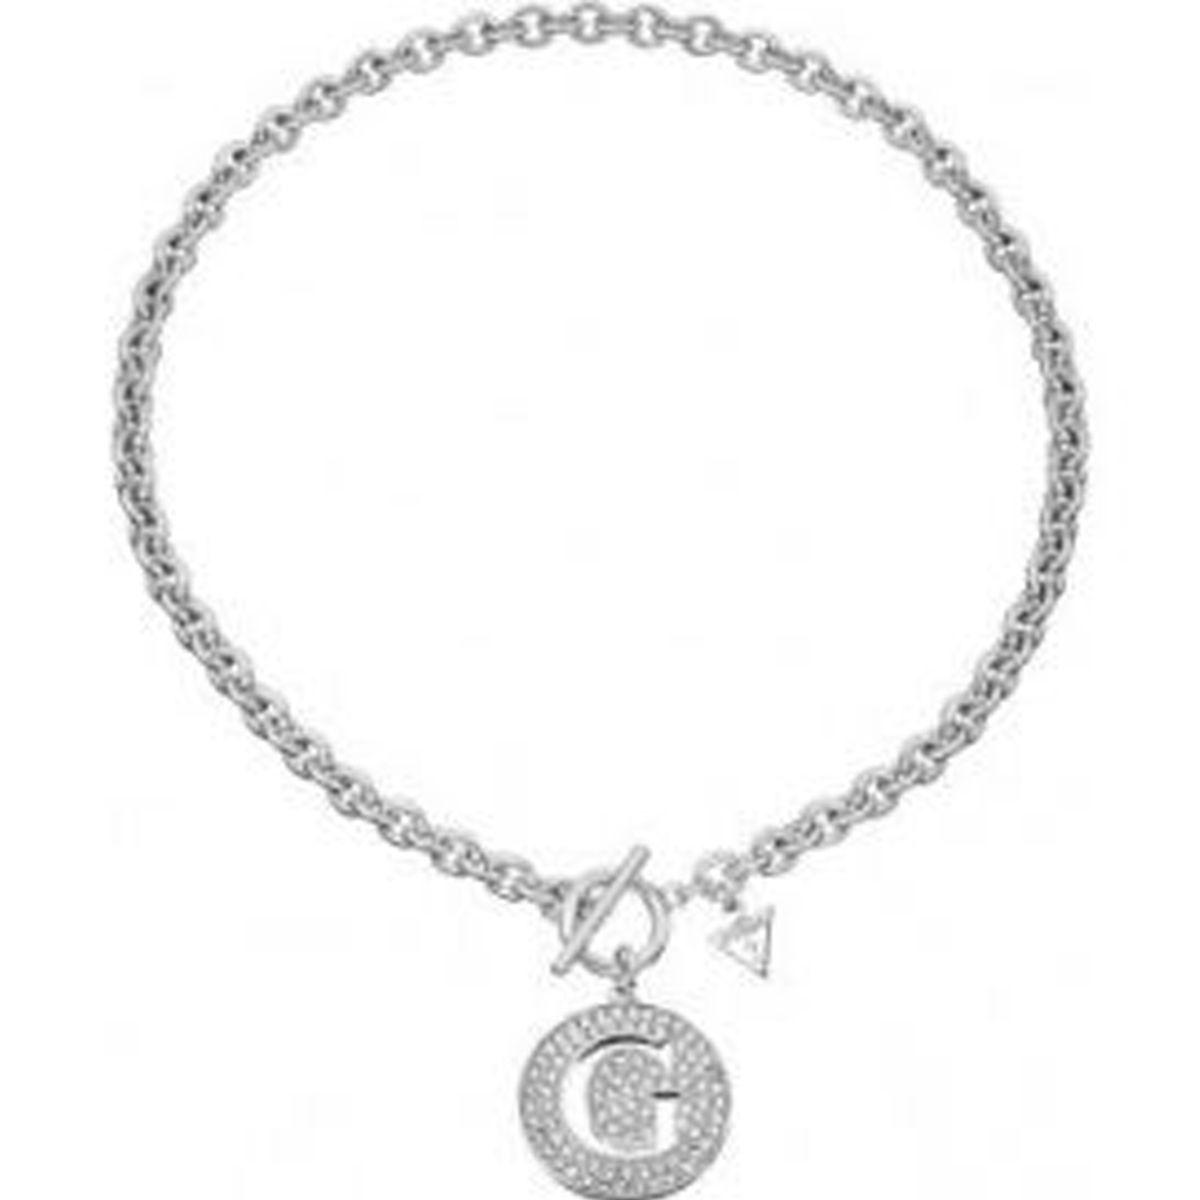 Guess G Logo - Ysora, Guess G Girl necklace in silvery metal with G logo